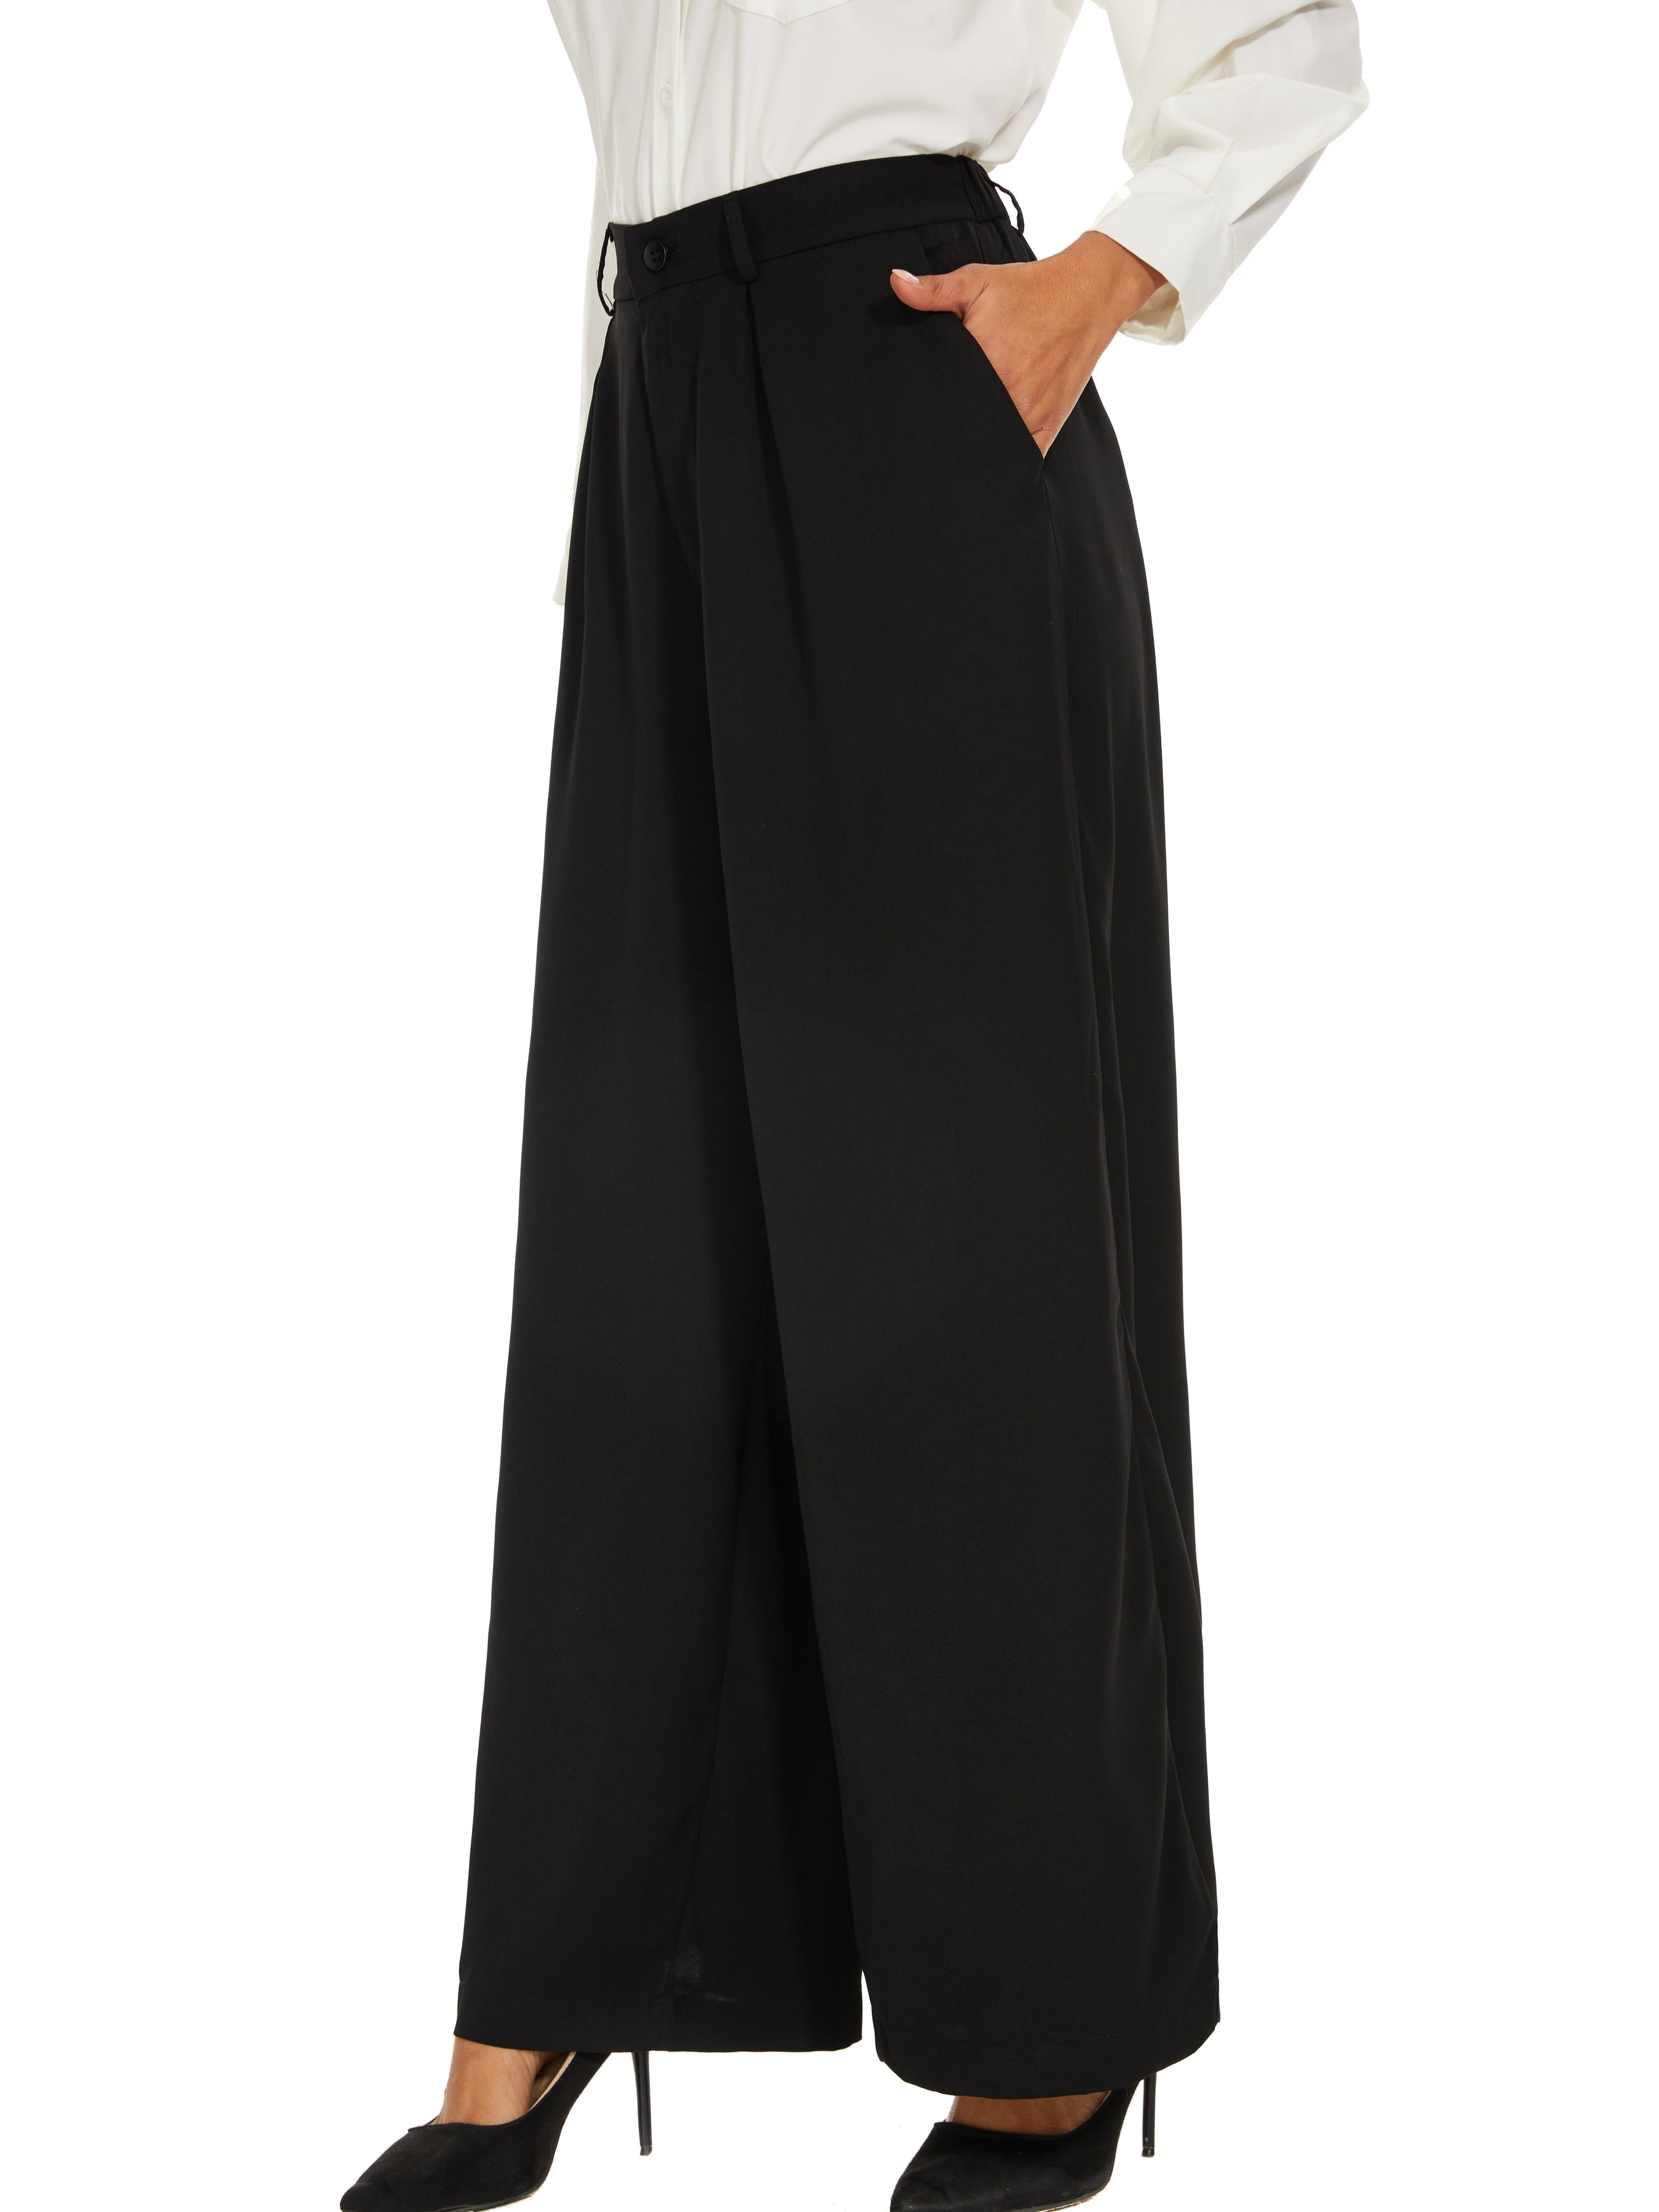 NUANYOYO Woman's Casual Full-Length Loose Pants,Solid Color Slim High Waist Wide  Leg Pants,Womans Straight Wide Leg (Black,S) at  Women's Clothing  store